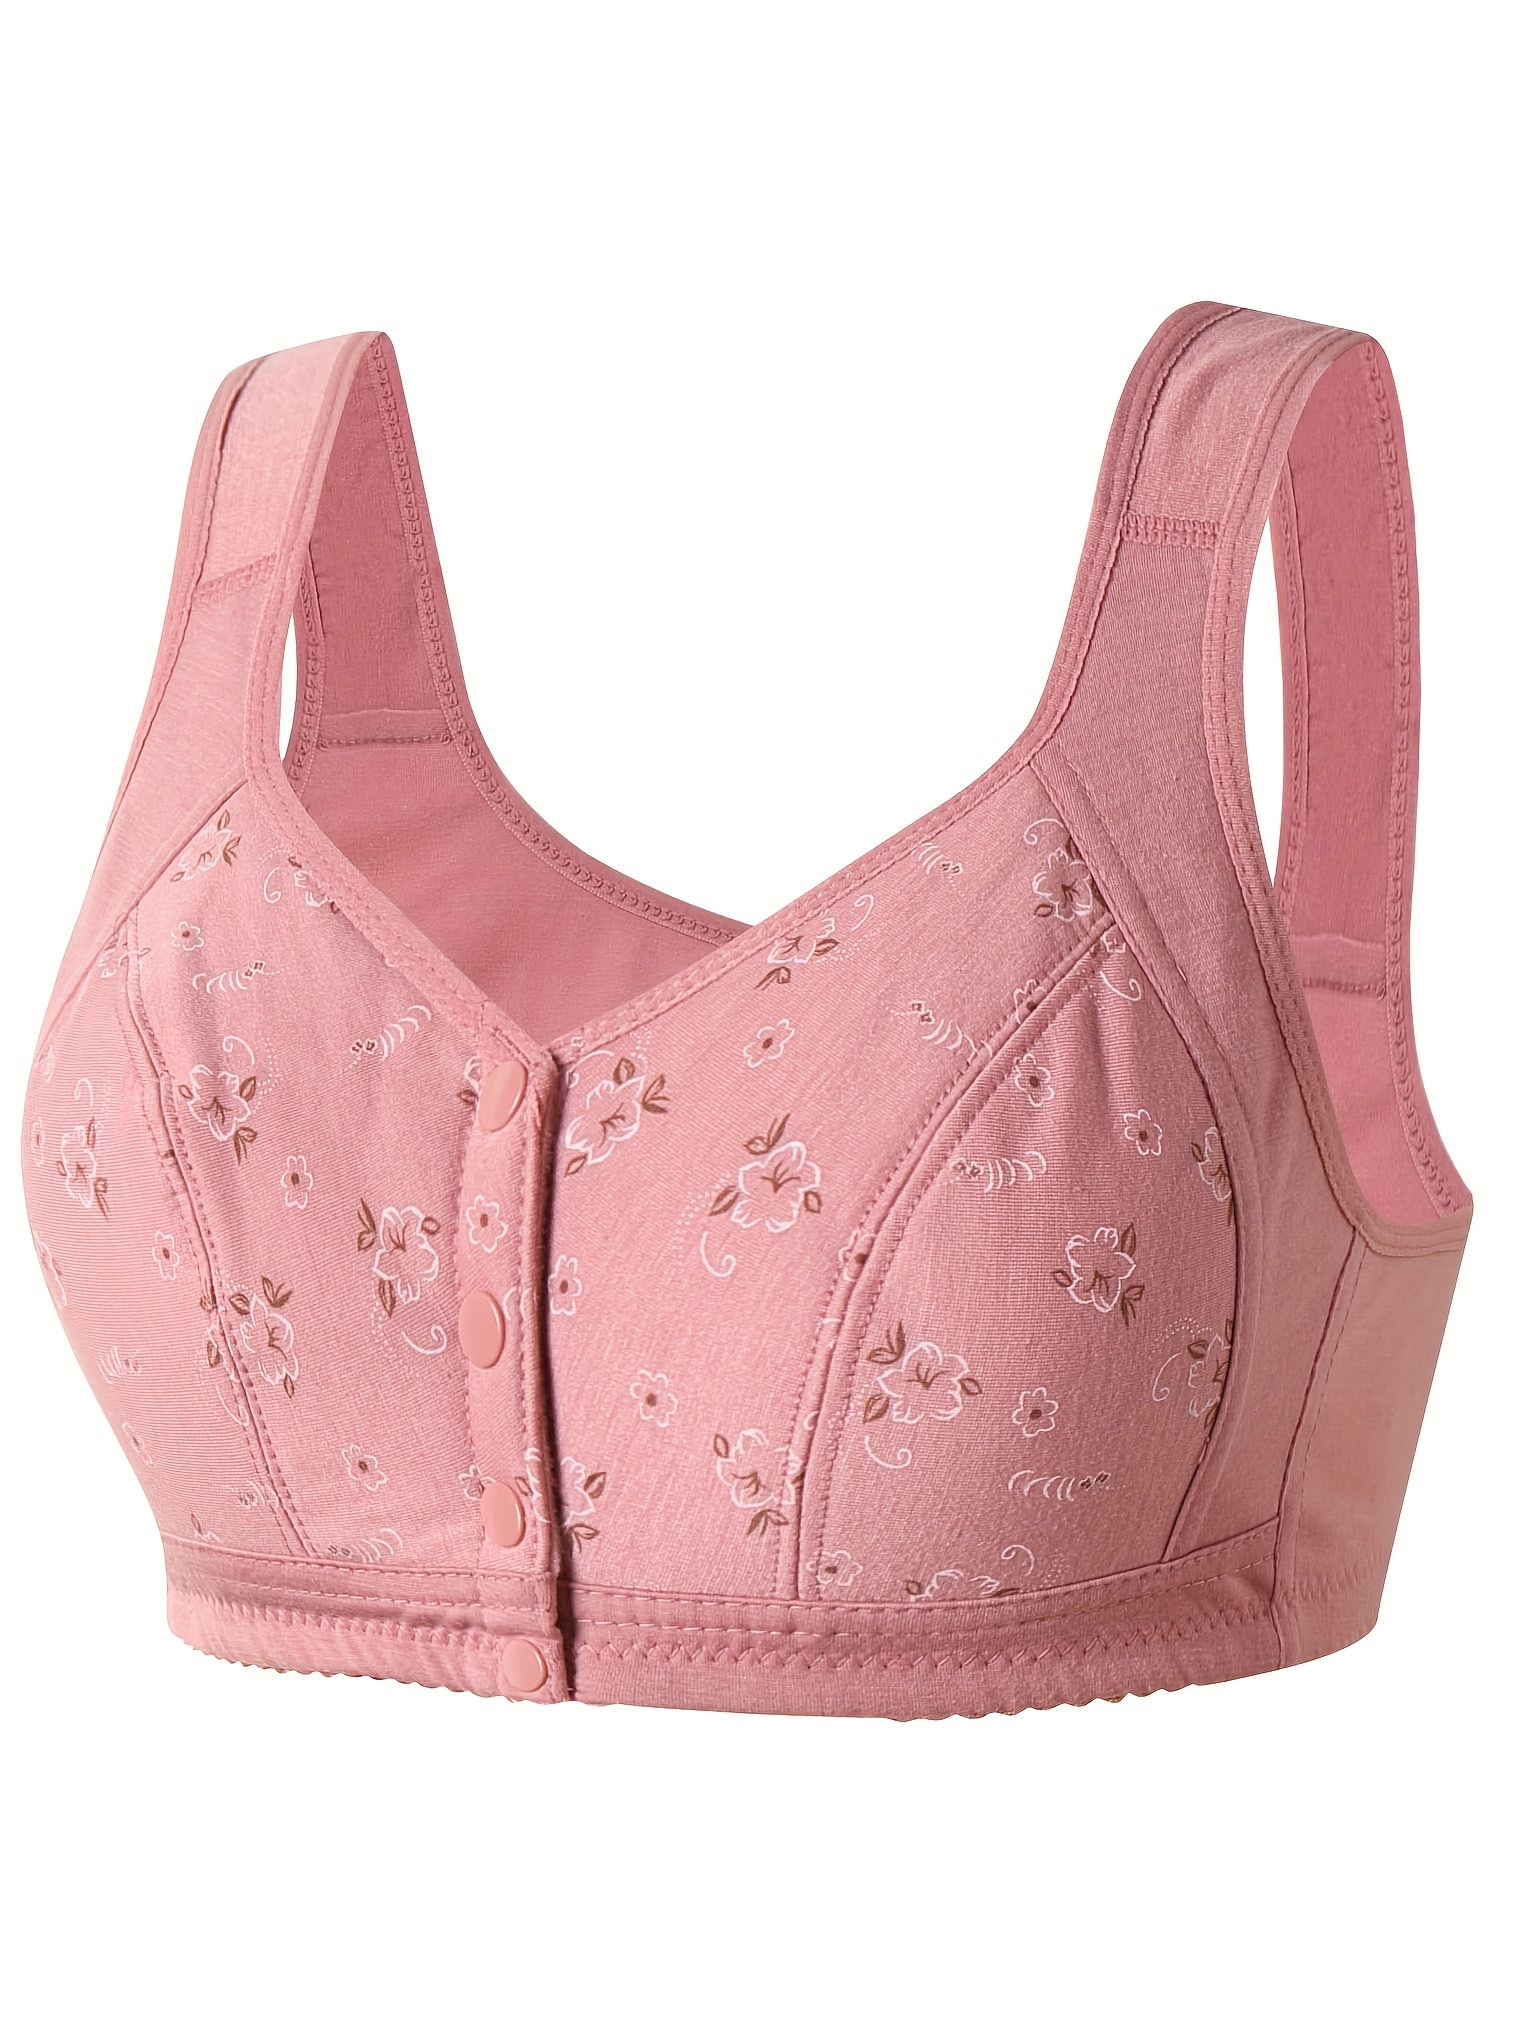 Sports Bra with Clasp 5PC Women's V Neck Lace Fixed Cup Wide